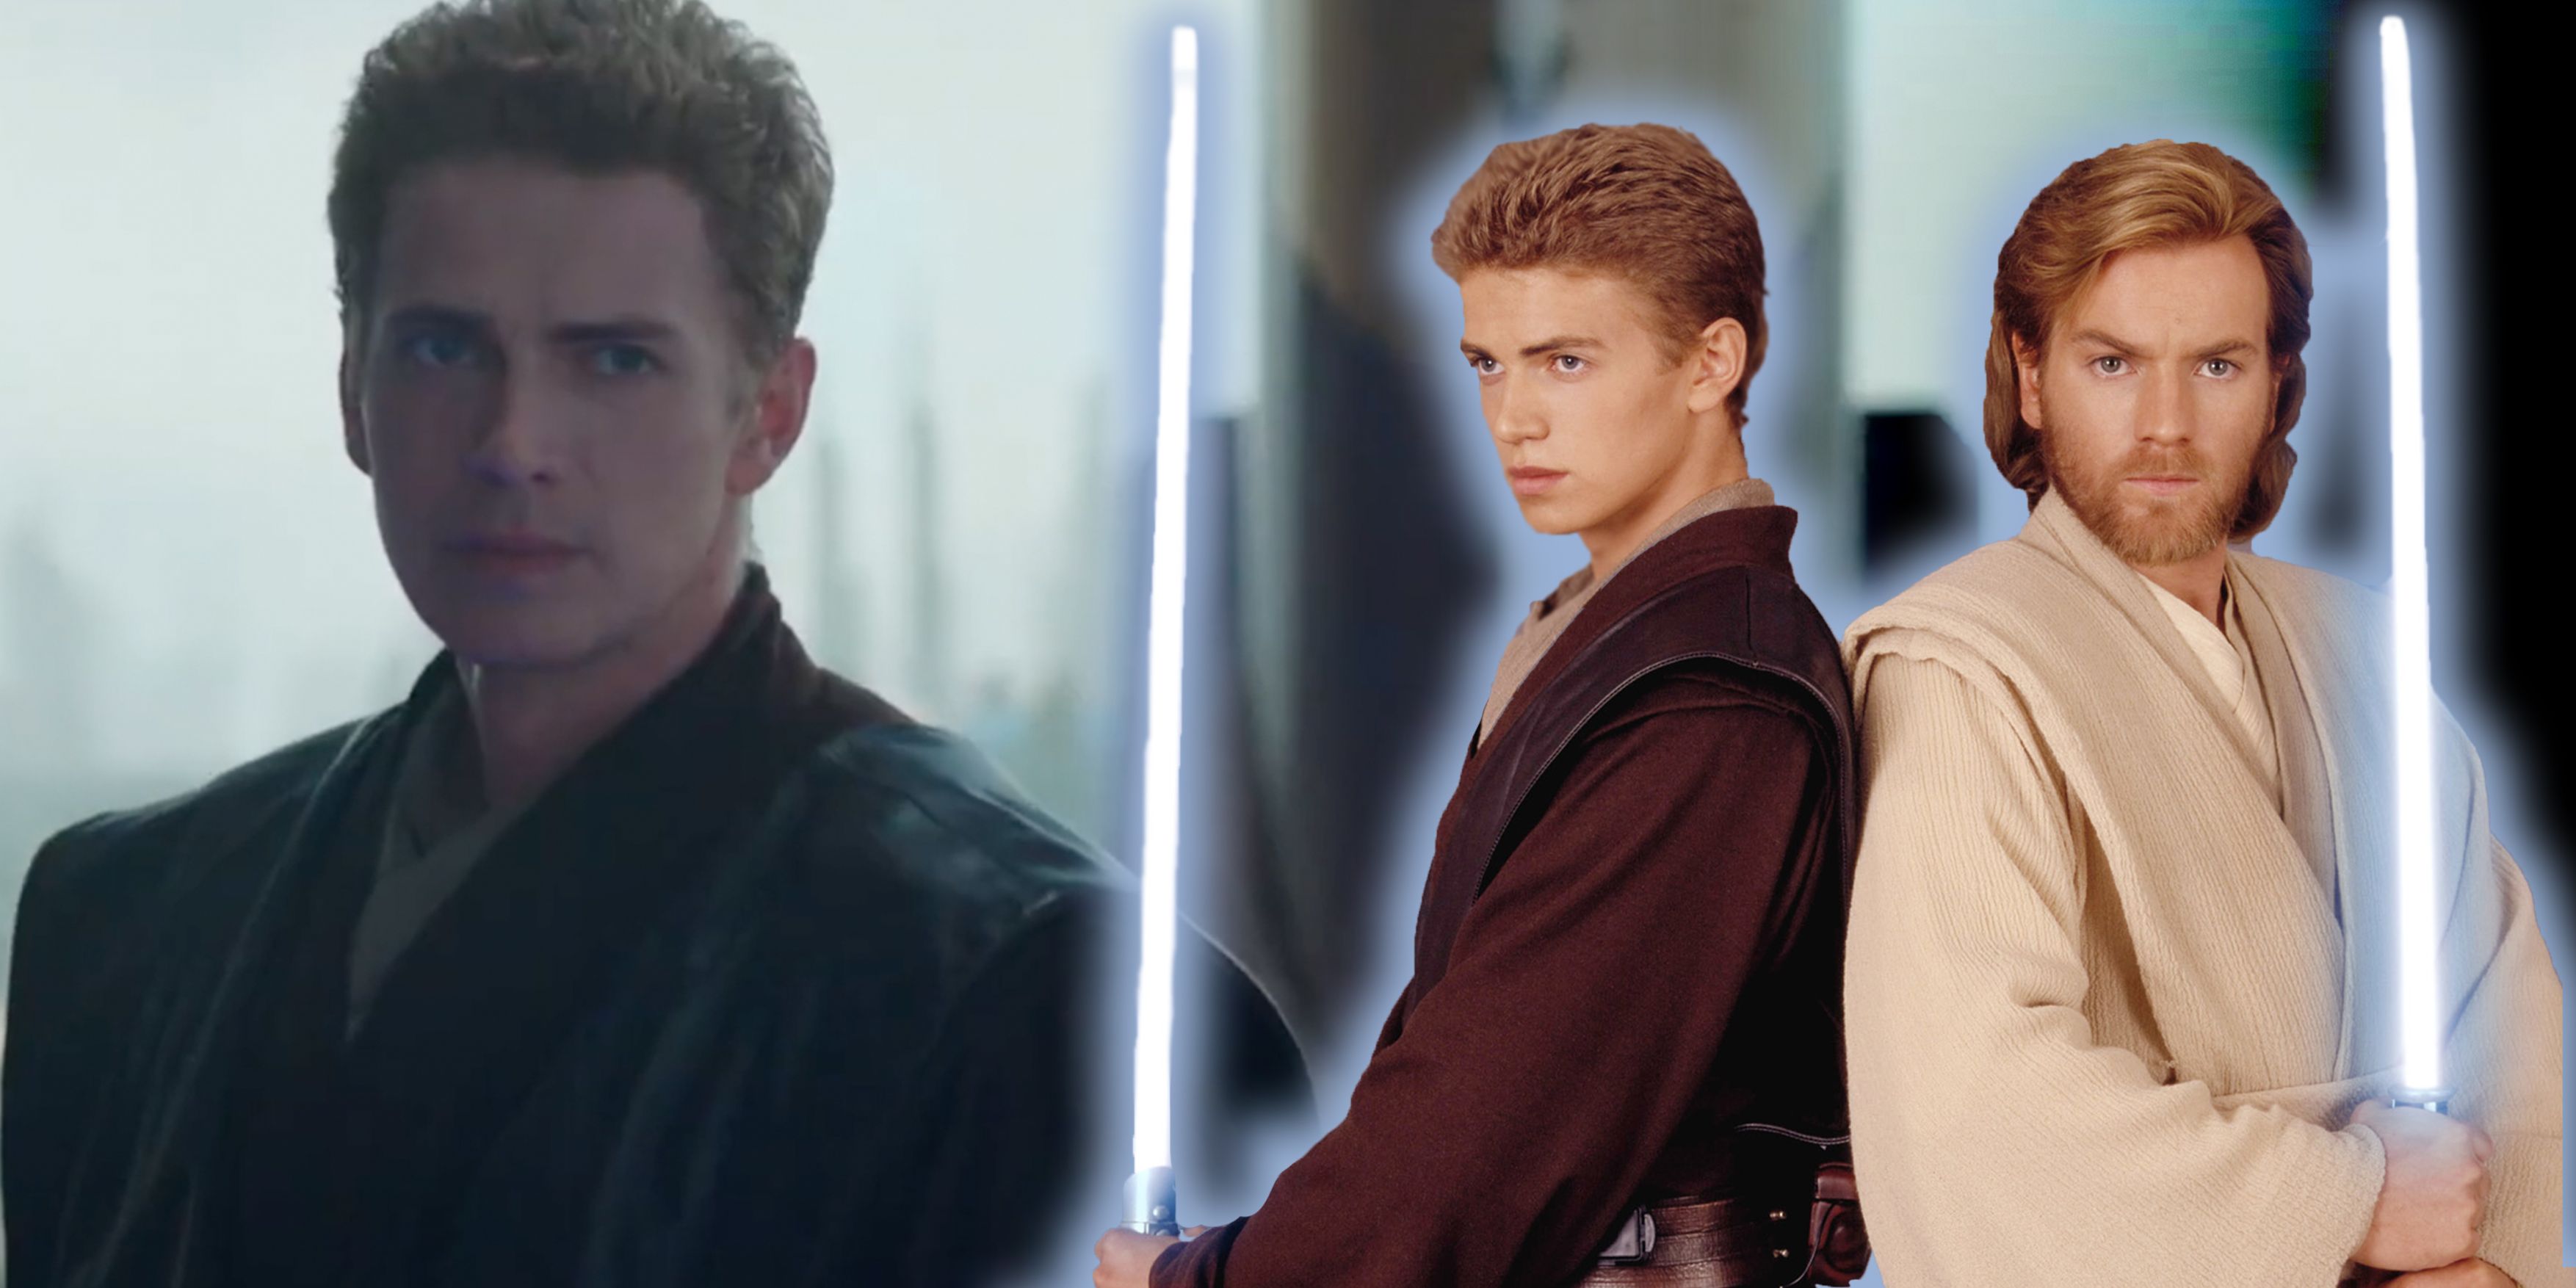 Older Anakin Skywalker juxtaposed with himself and Obi-Wan from Attack of the Clones